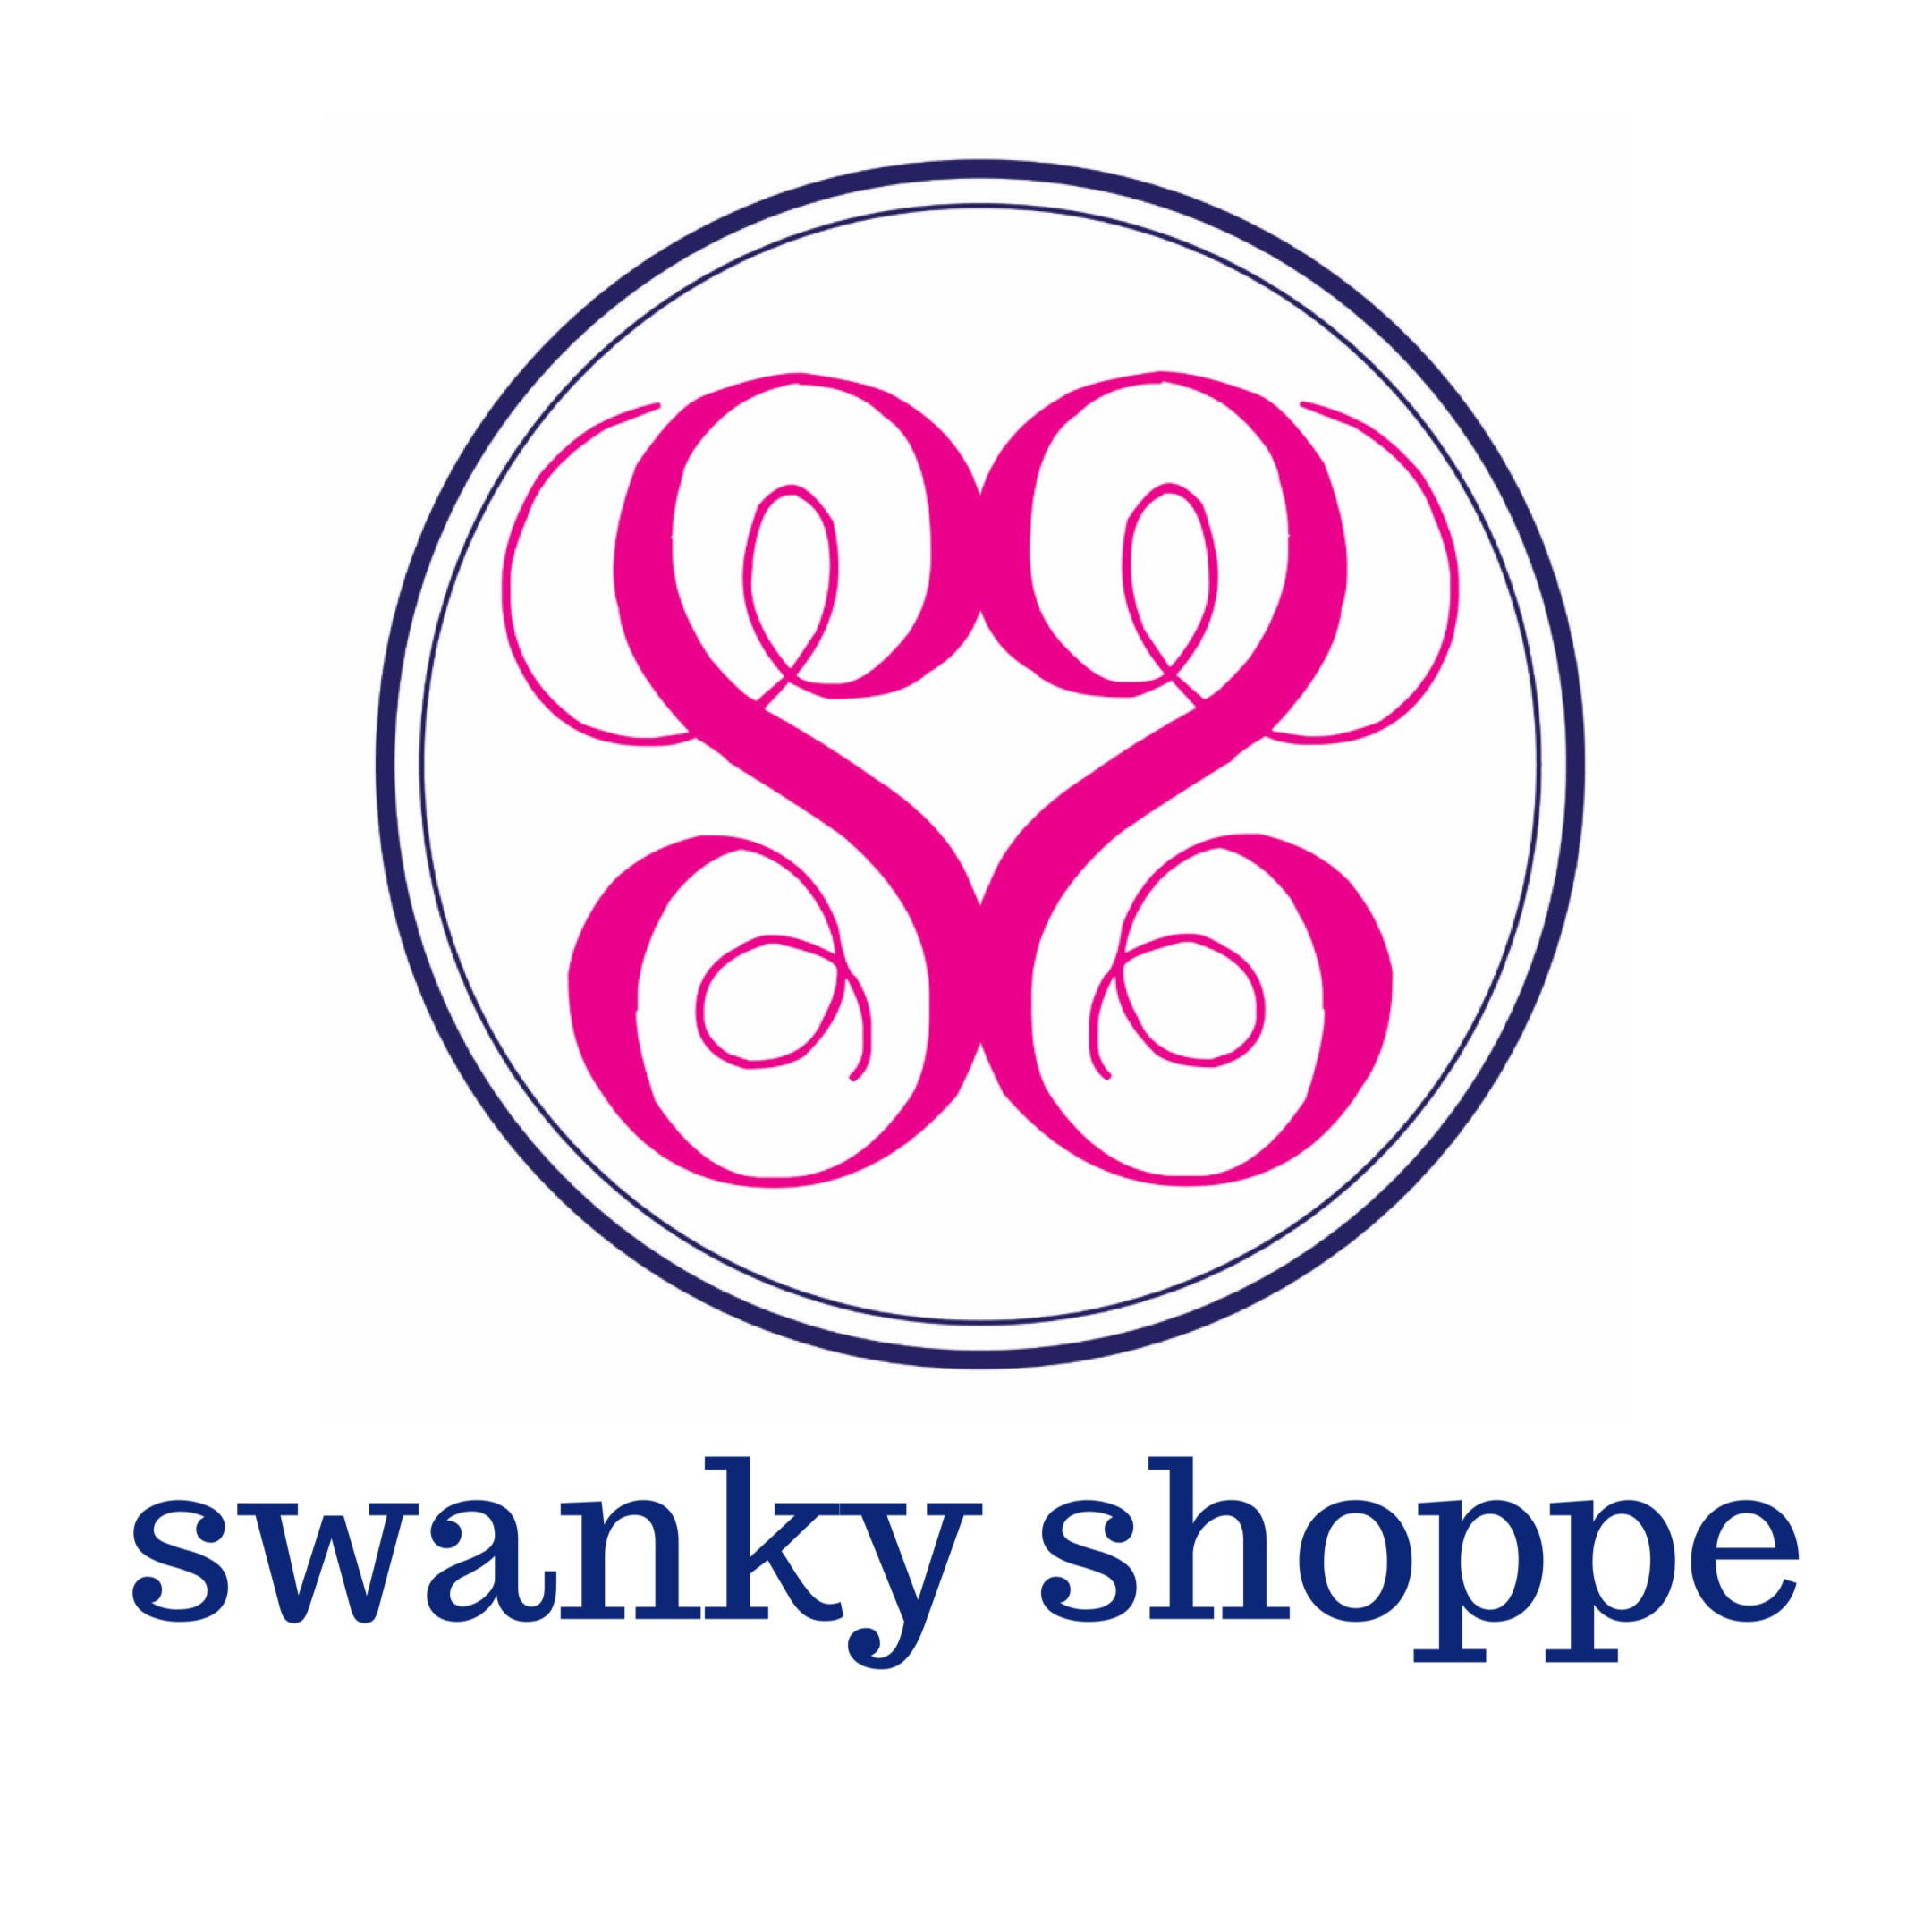 About Swanky Shoppe